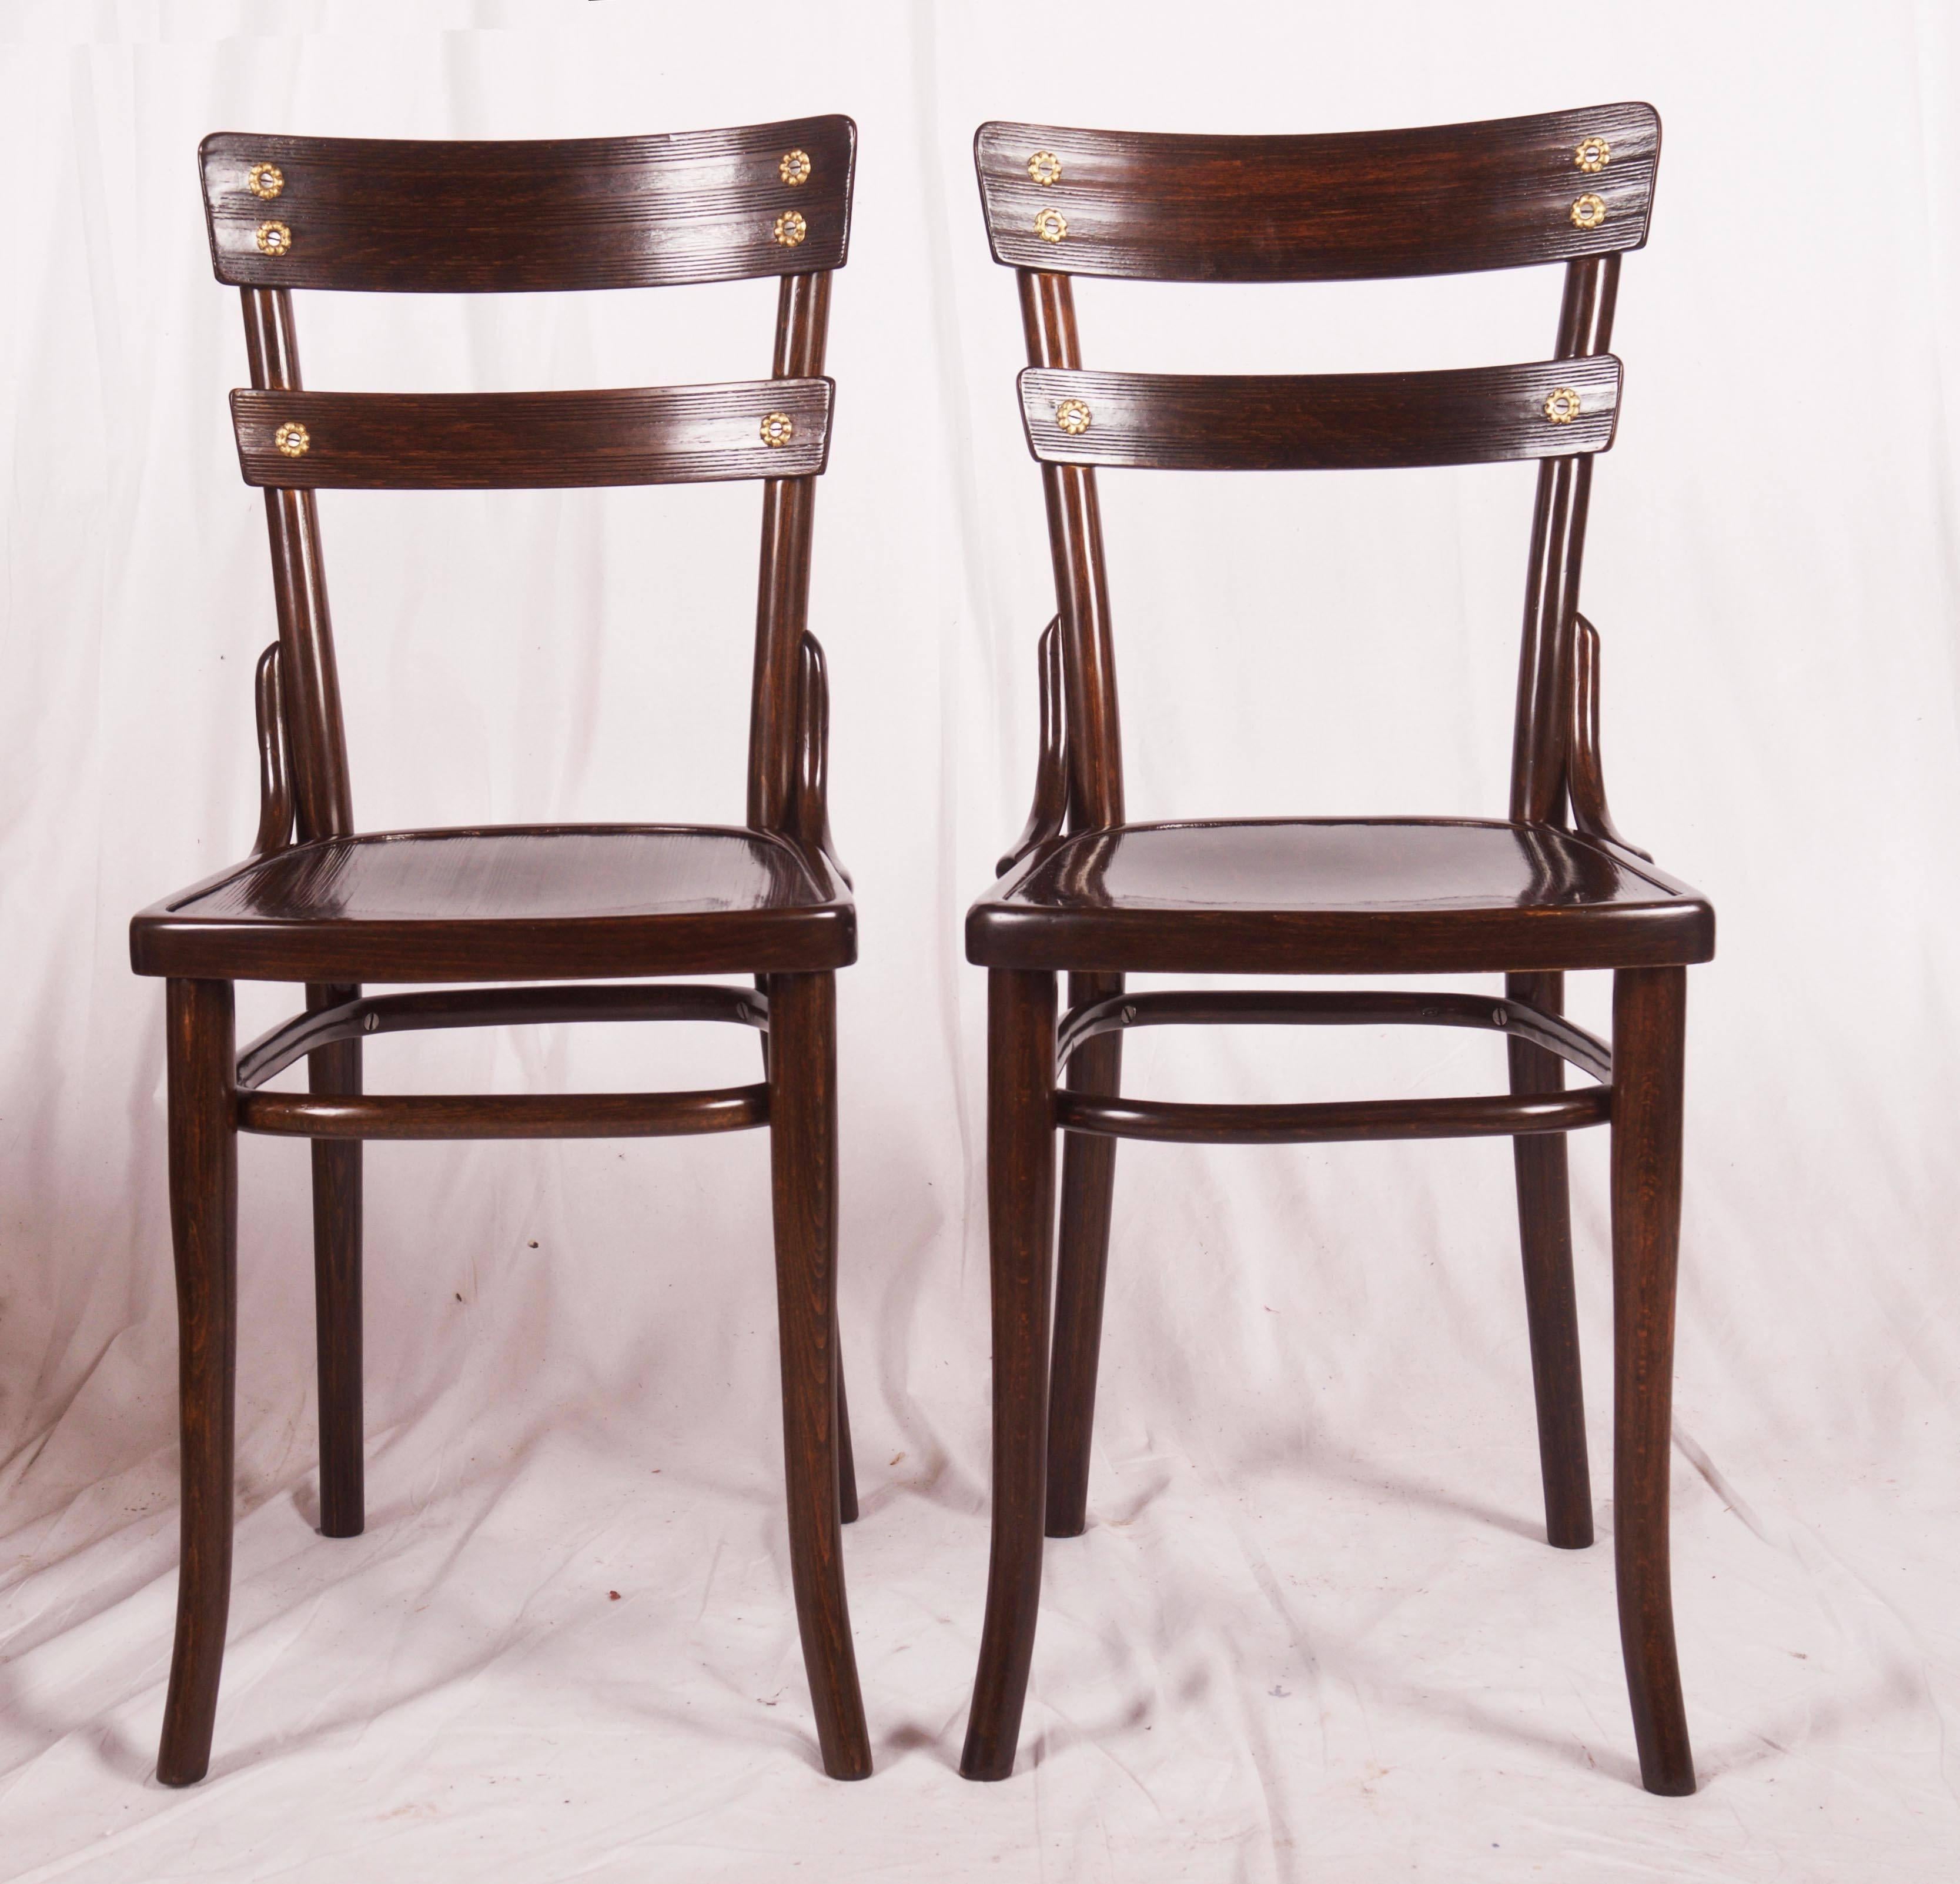 Thonet Dining Room Chairs In Excellent Condition For Sale In Vienna, AT